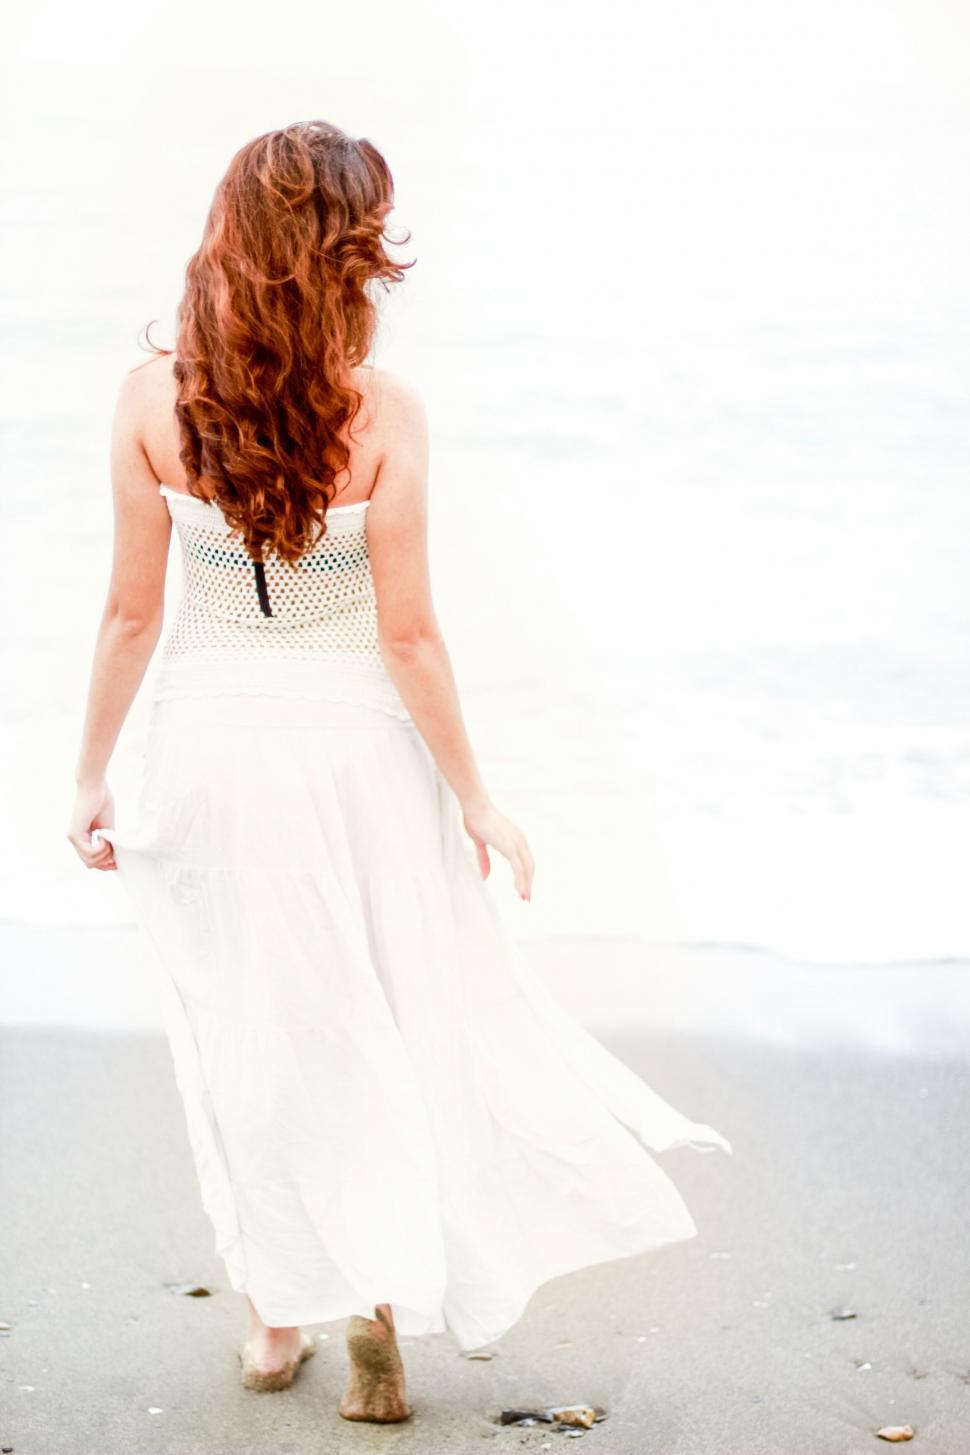 Free Image of A woman in a white dress 